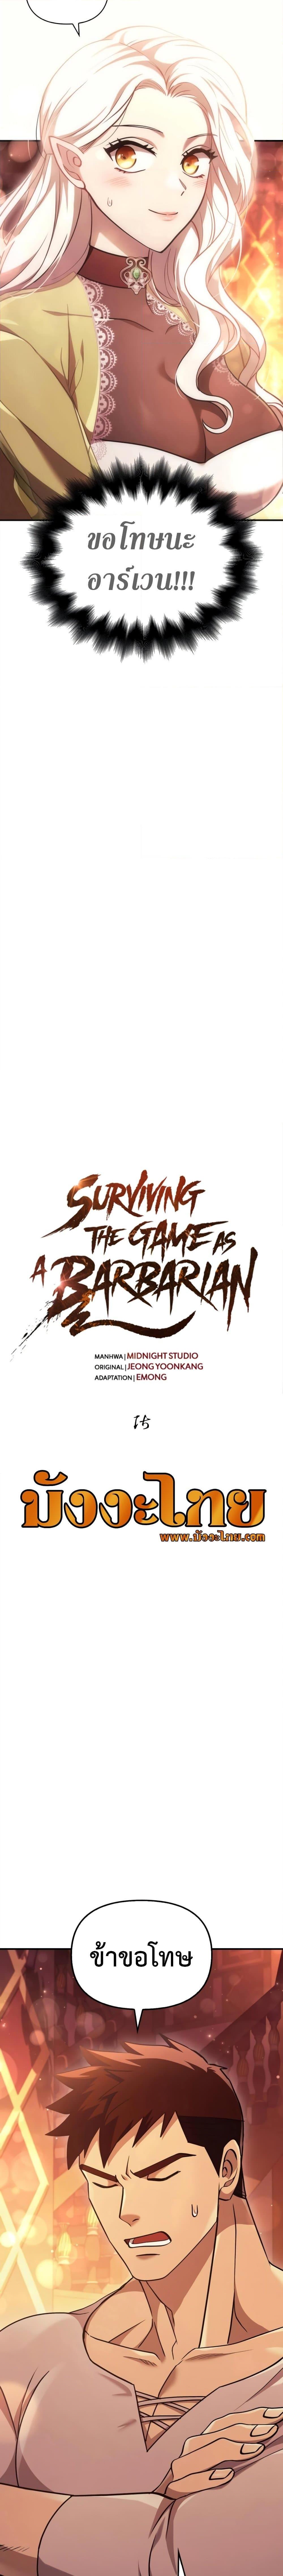 Surviving The Game as a Barbarian 15 04